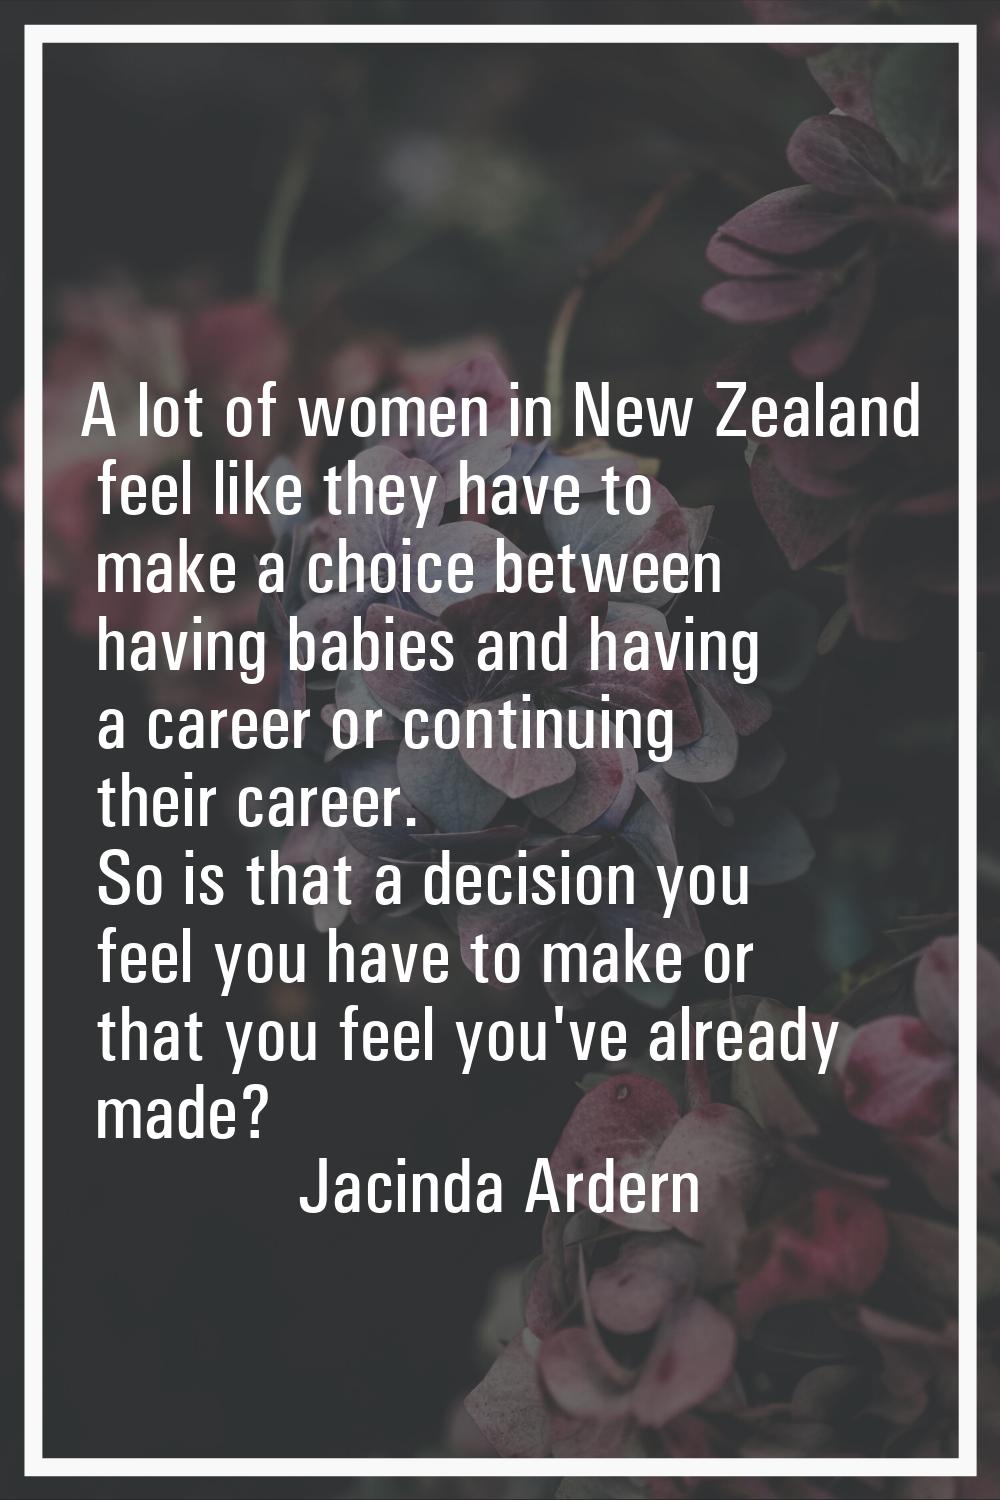 A lot of women in New Zealand feel like they have to make a choice between having babies and having